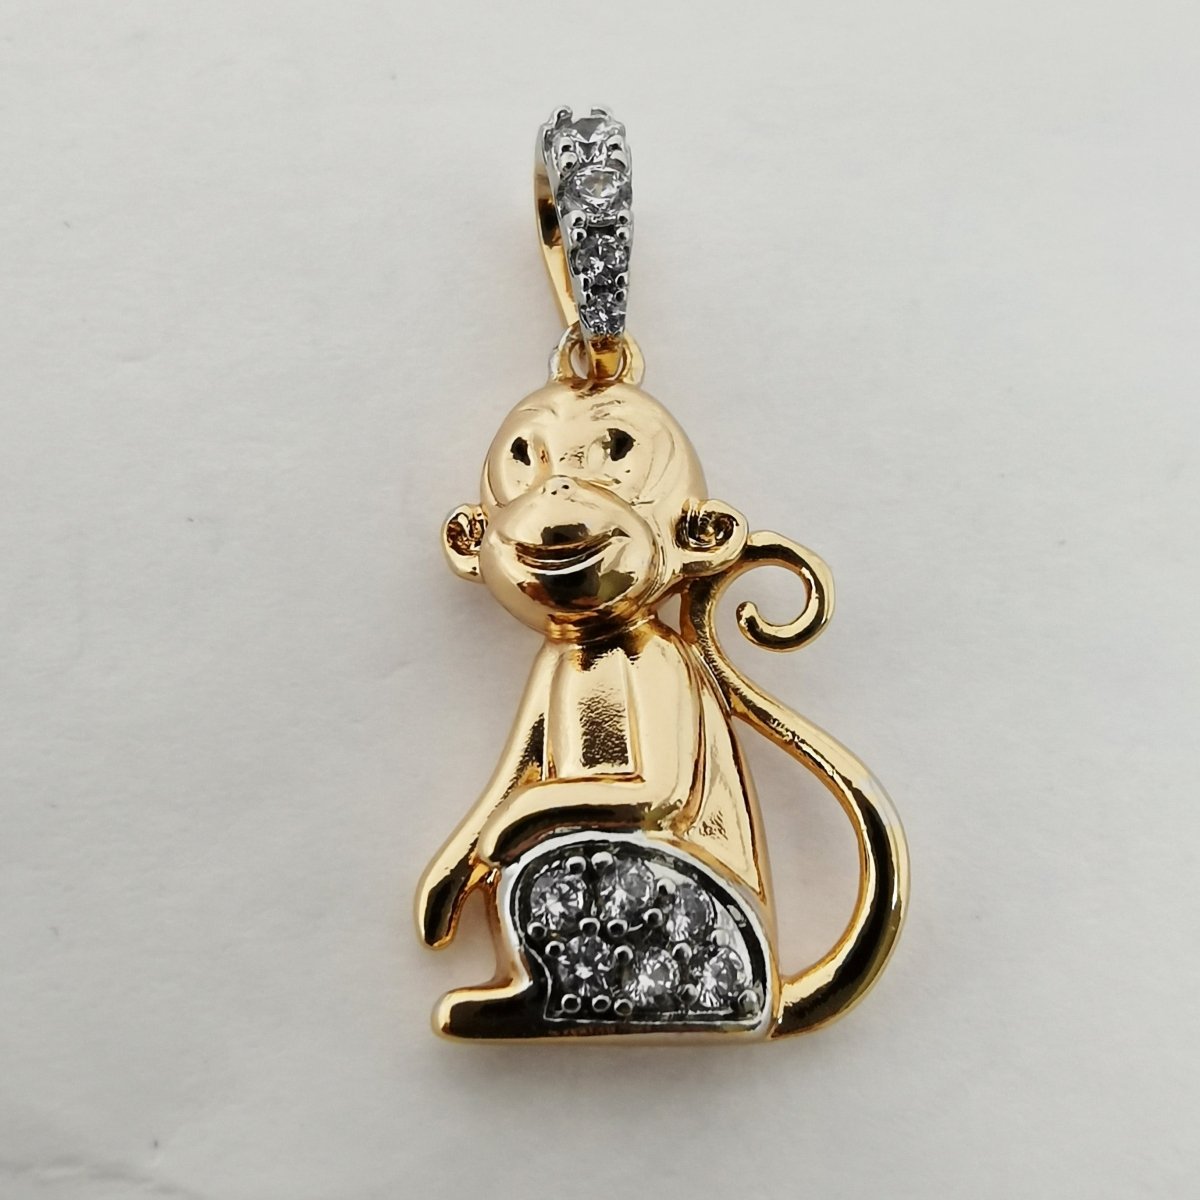 Cute Monkey Pendant in 24k Gold Filled with Clear Cubic Zirconia Funny Wild Animal Inspired I-715 - DLUXCA